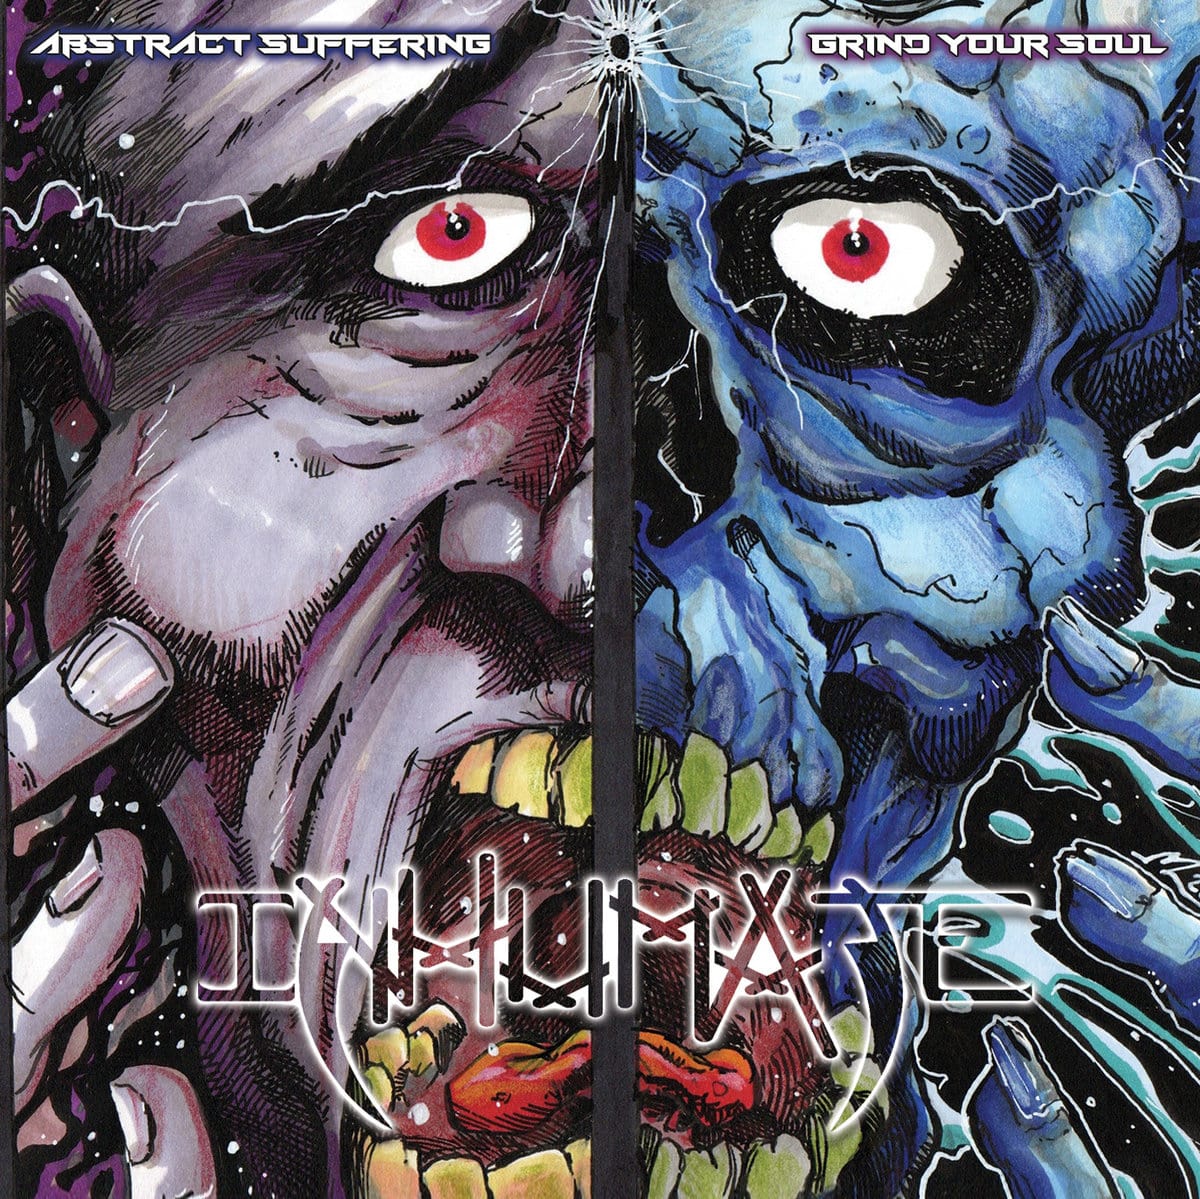 Inhumate-Abstract Suffering Grind Your Soul-min